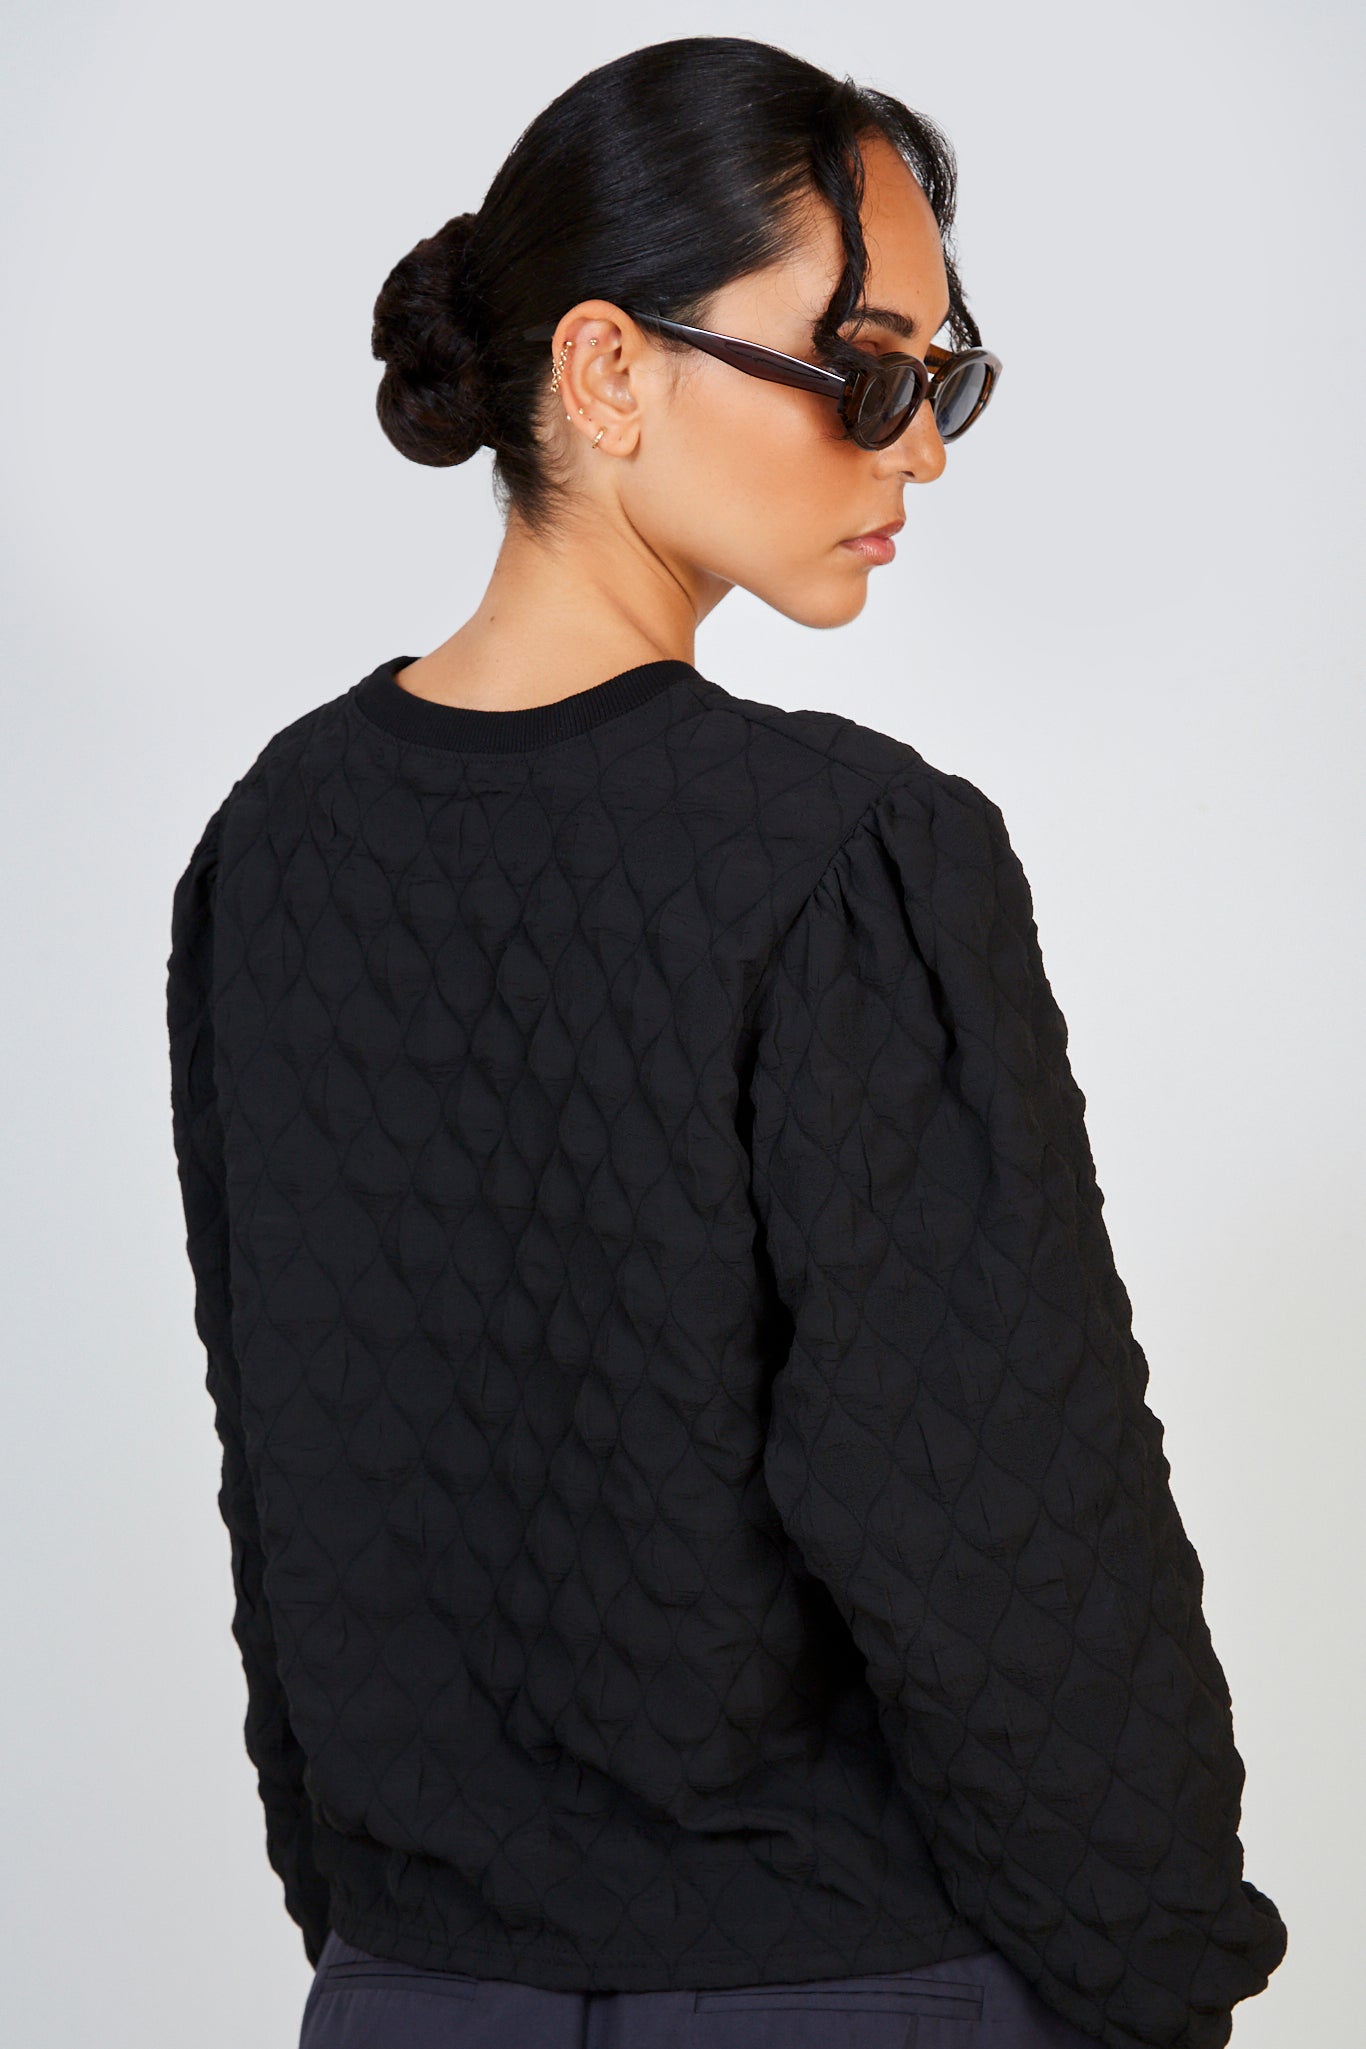 Black textured bubble long sleeved top